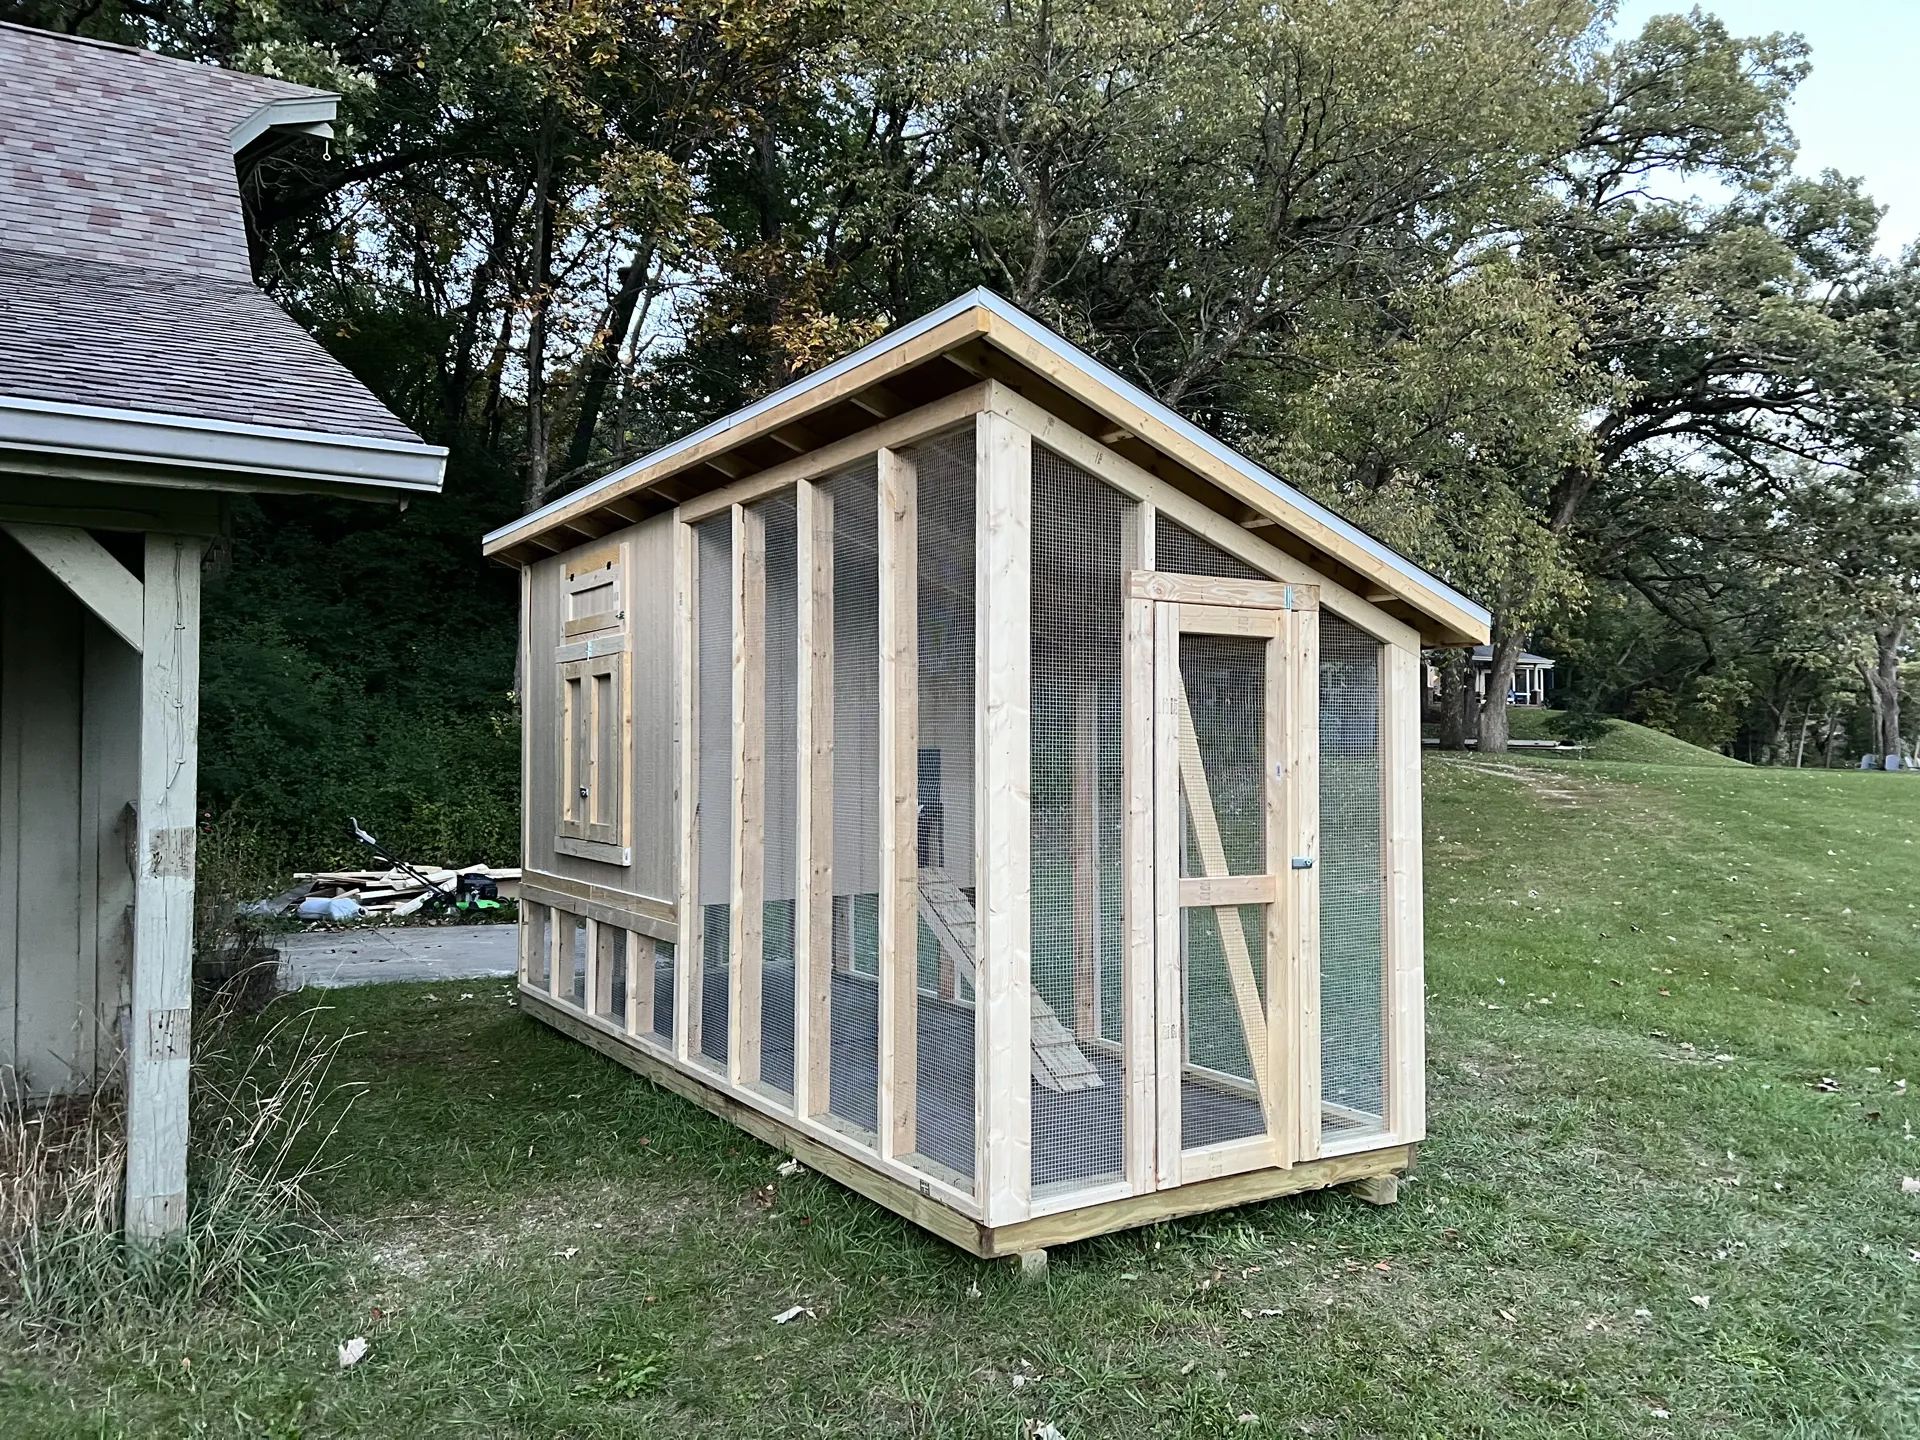 Front of completed coop